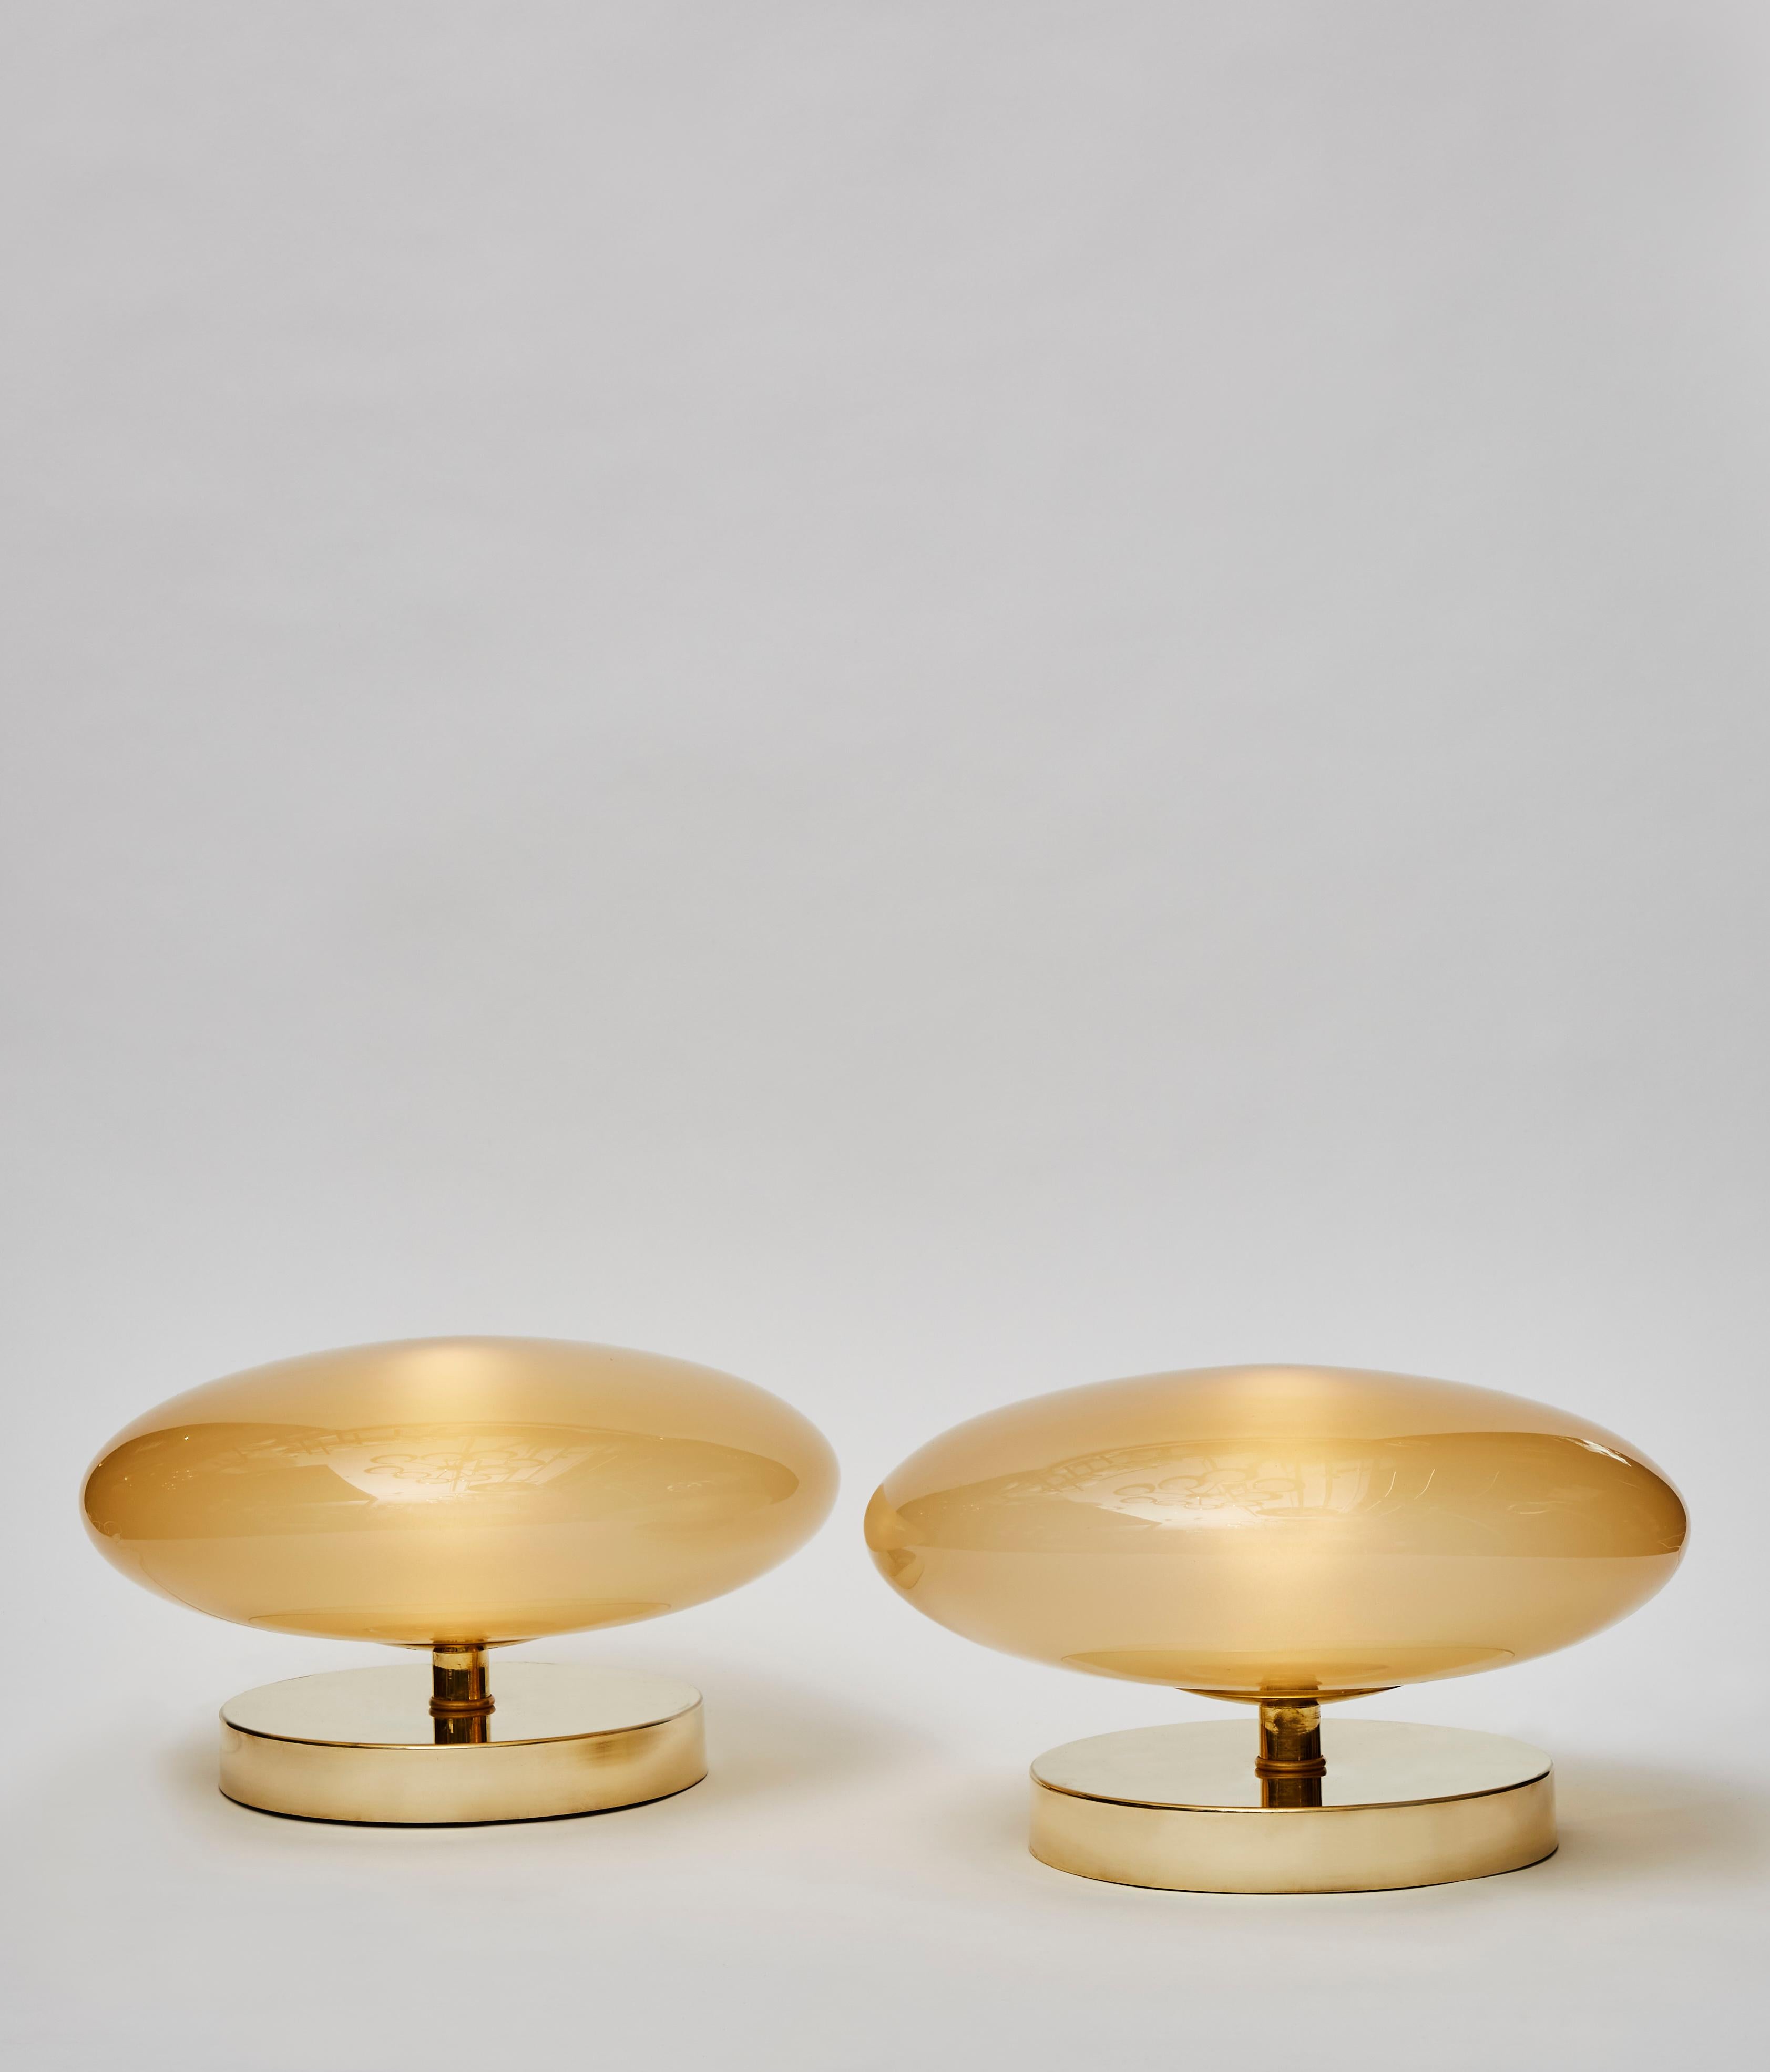 Pair of small table lamps, made of brass feet and wide tinted glass globe.